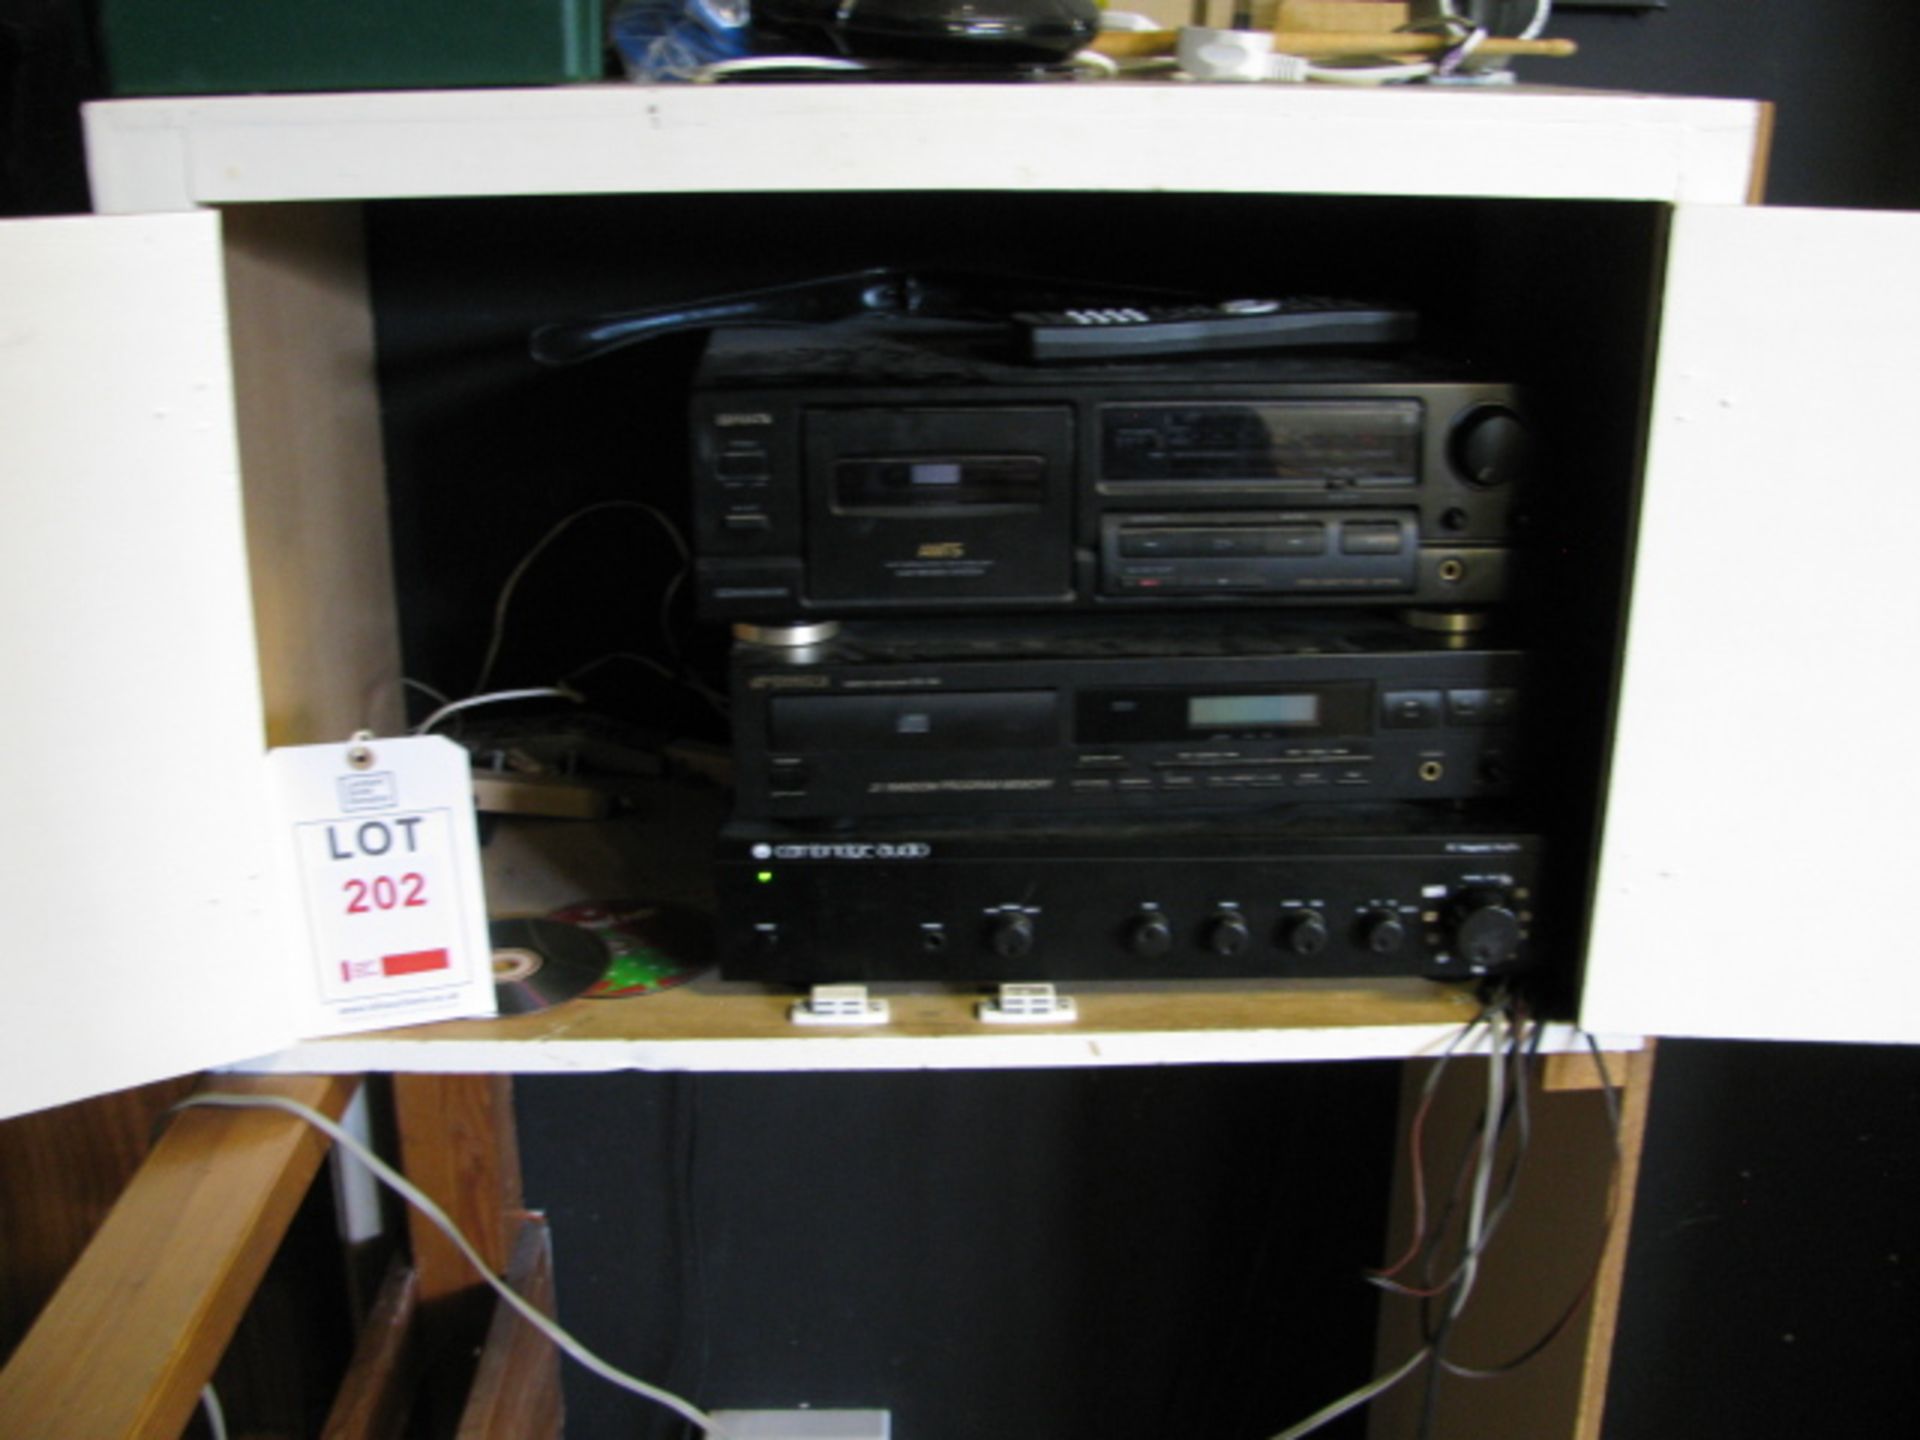 The stage sound system to include: AIWA ADF450 tape deck, Sansui CD190 CD player, Cambridge Audio A1